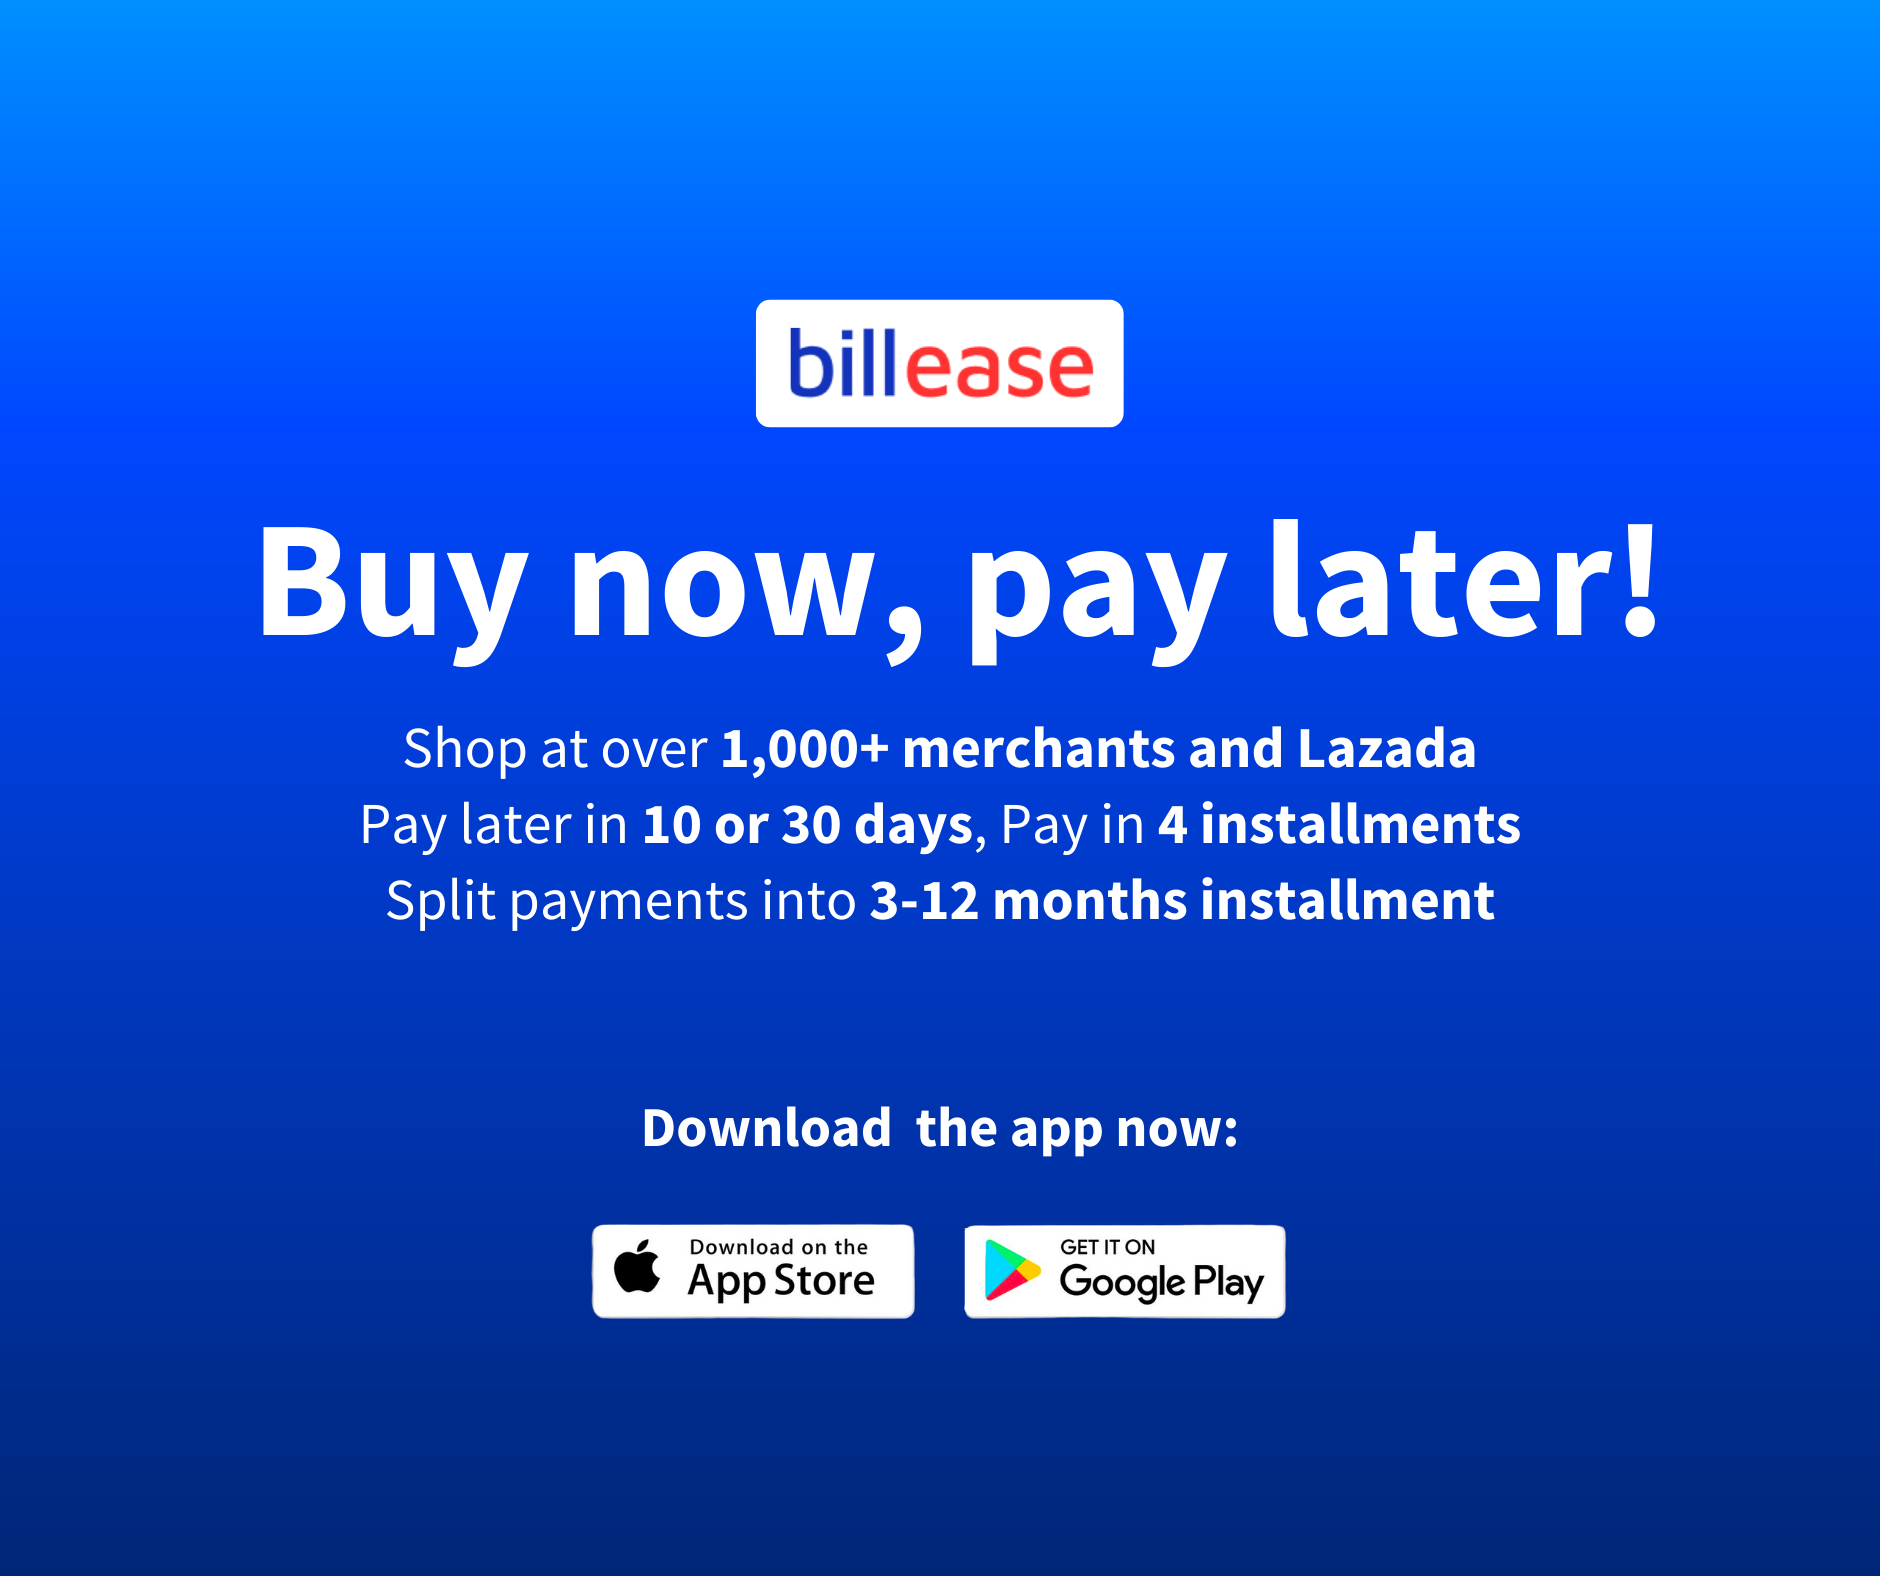 billease loan - buy now pay later